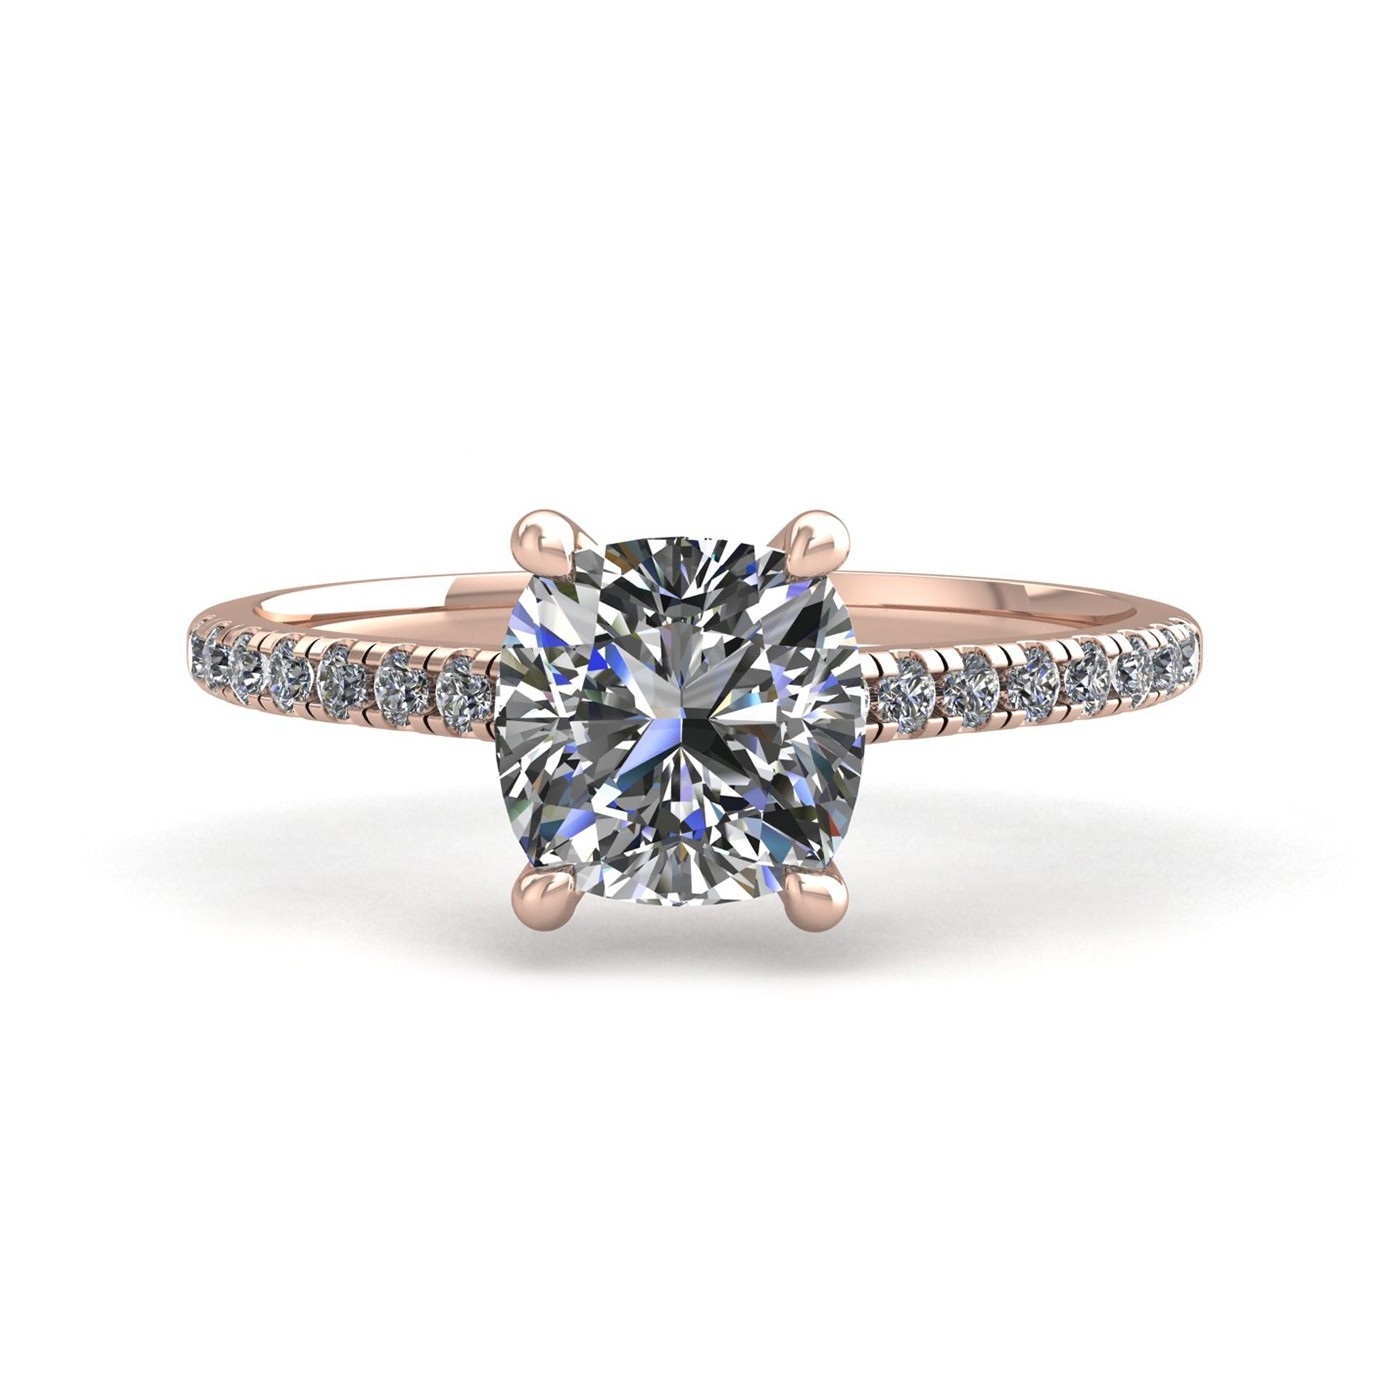 18k rose gold  0,50 ct 4 prongs cushion cut diamond engagement ring with whisper thin pavÉ set band Photos & images